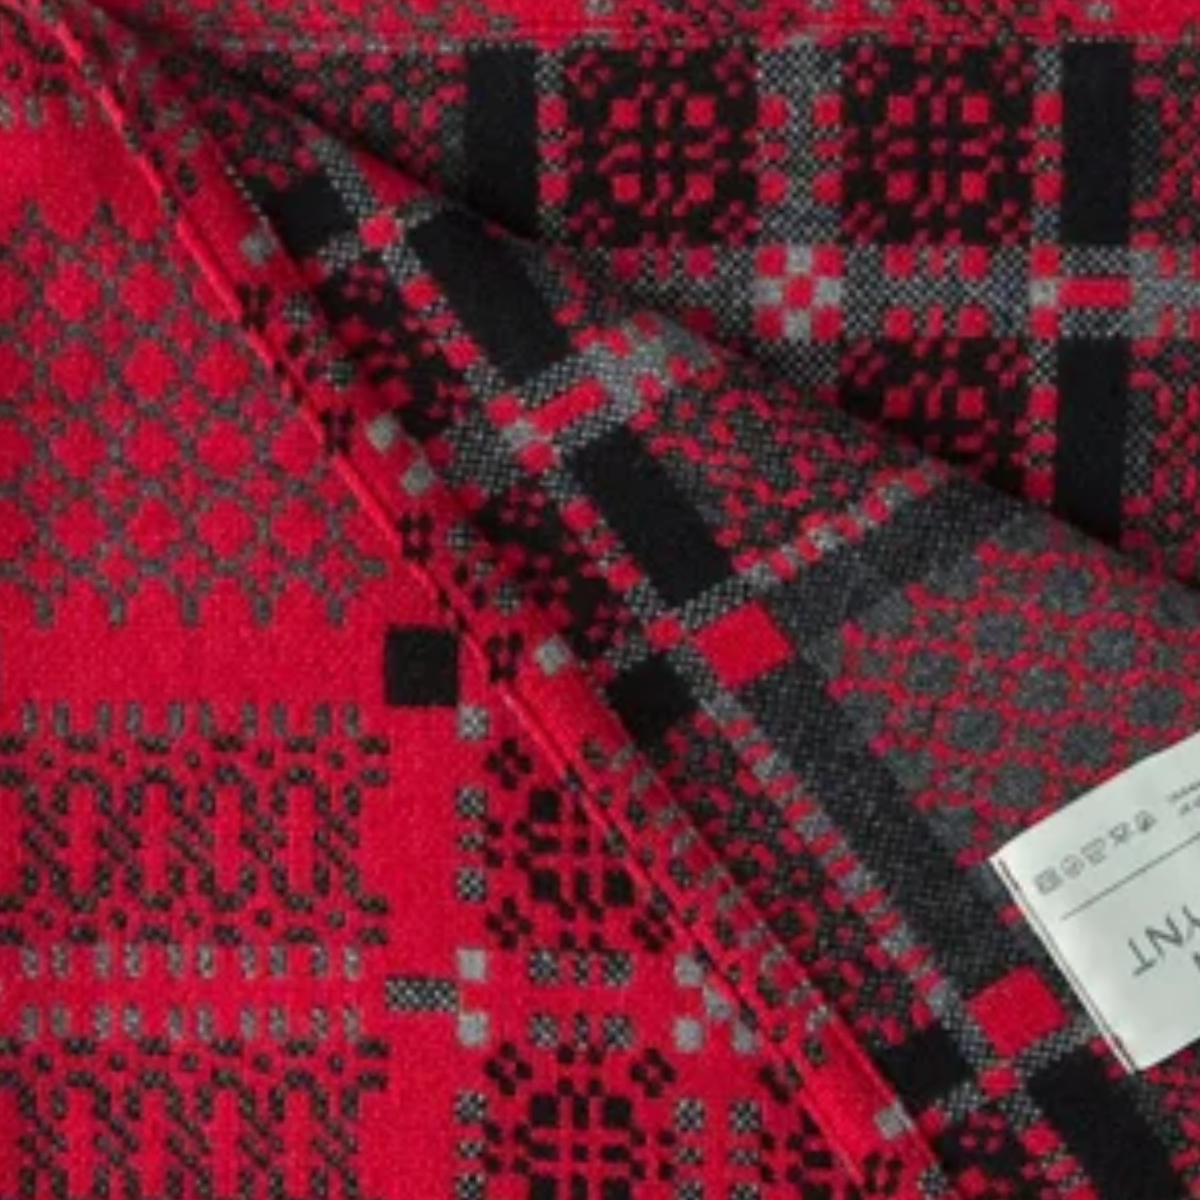 Red 'Knot Garden' pure lambswool throw by Melin Tregwynt